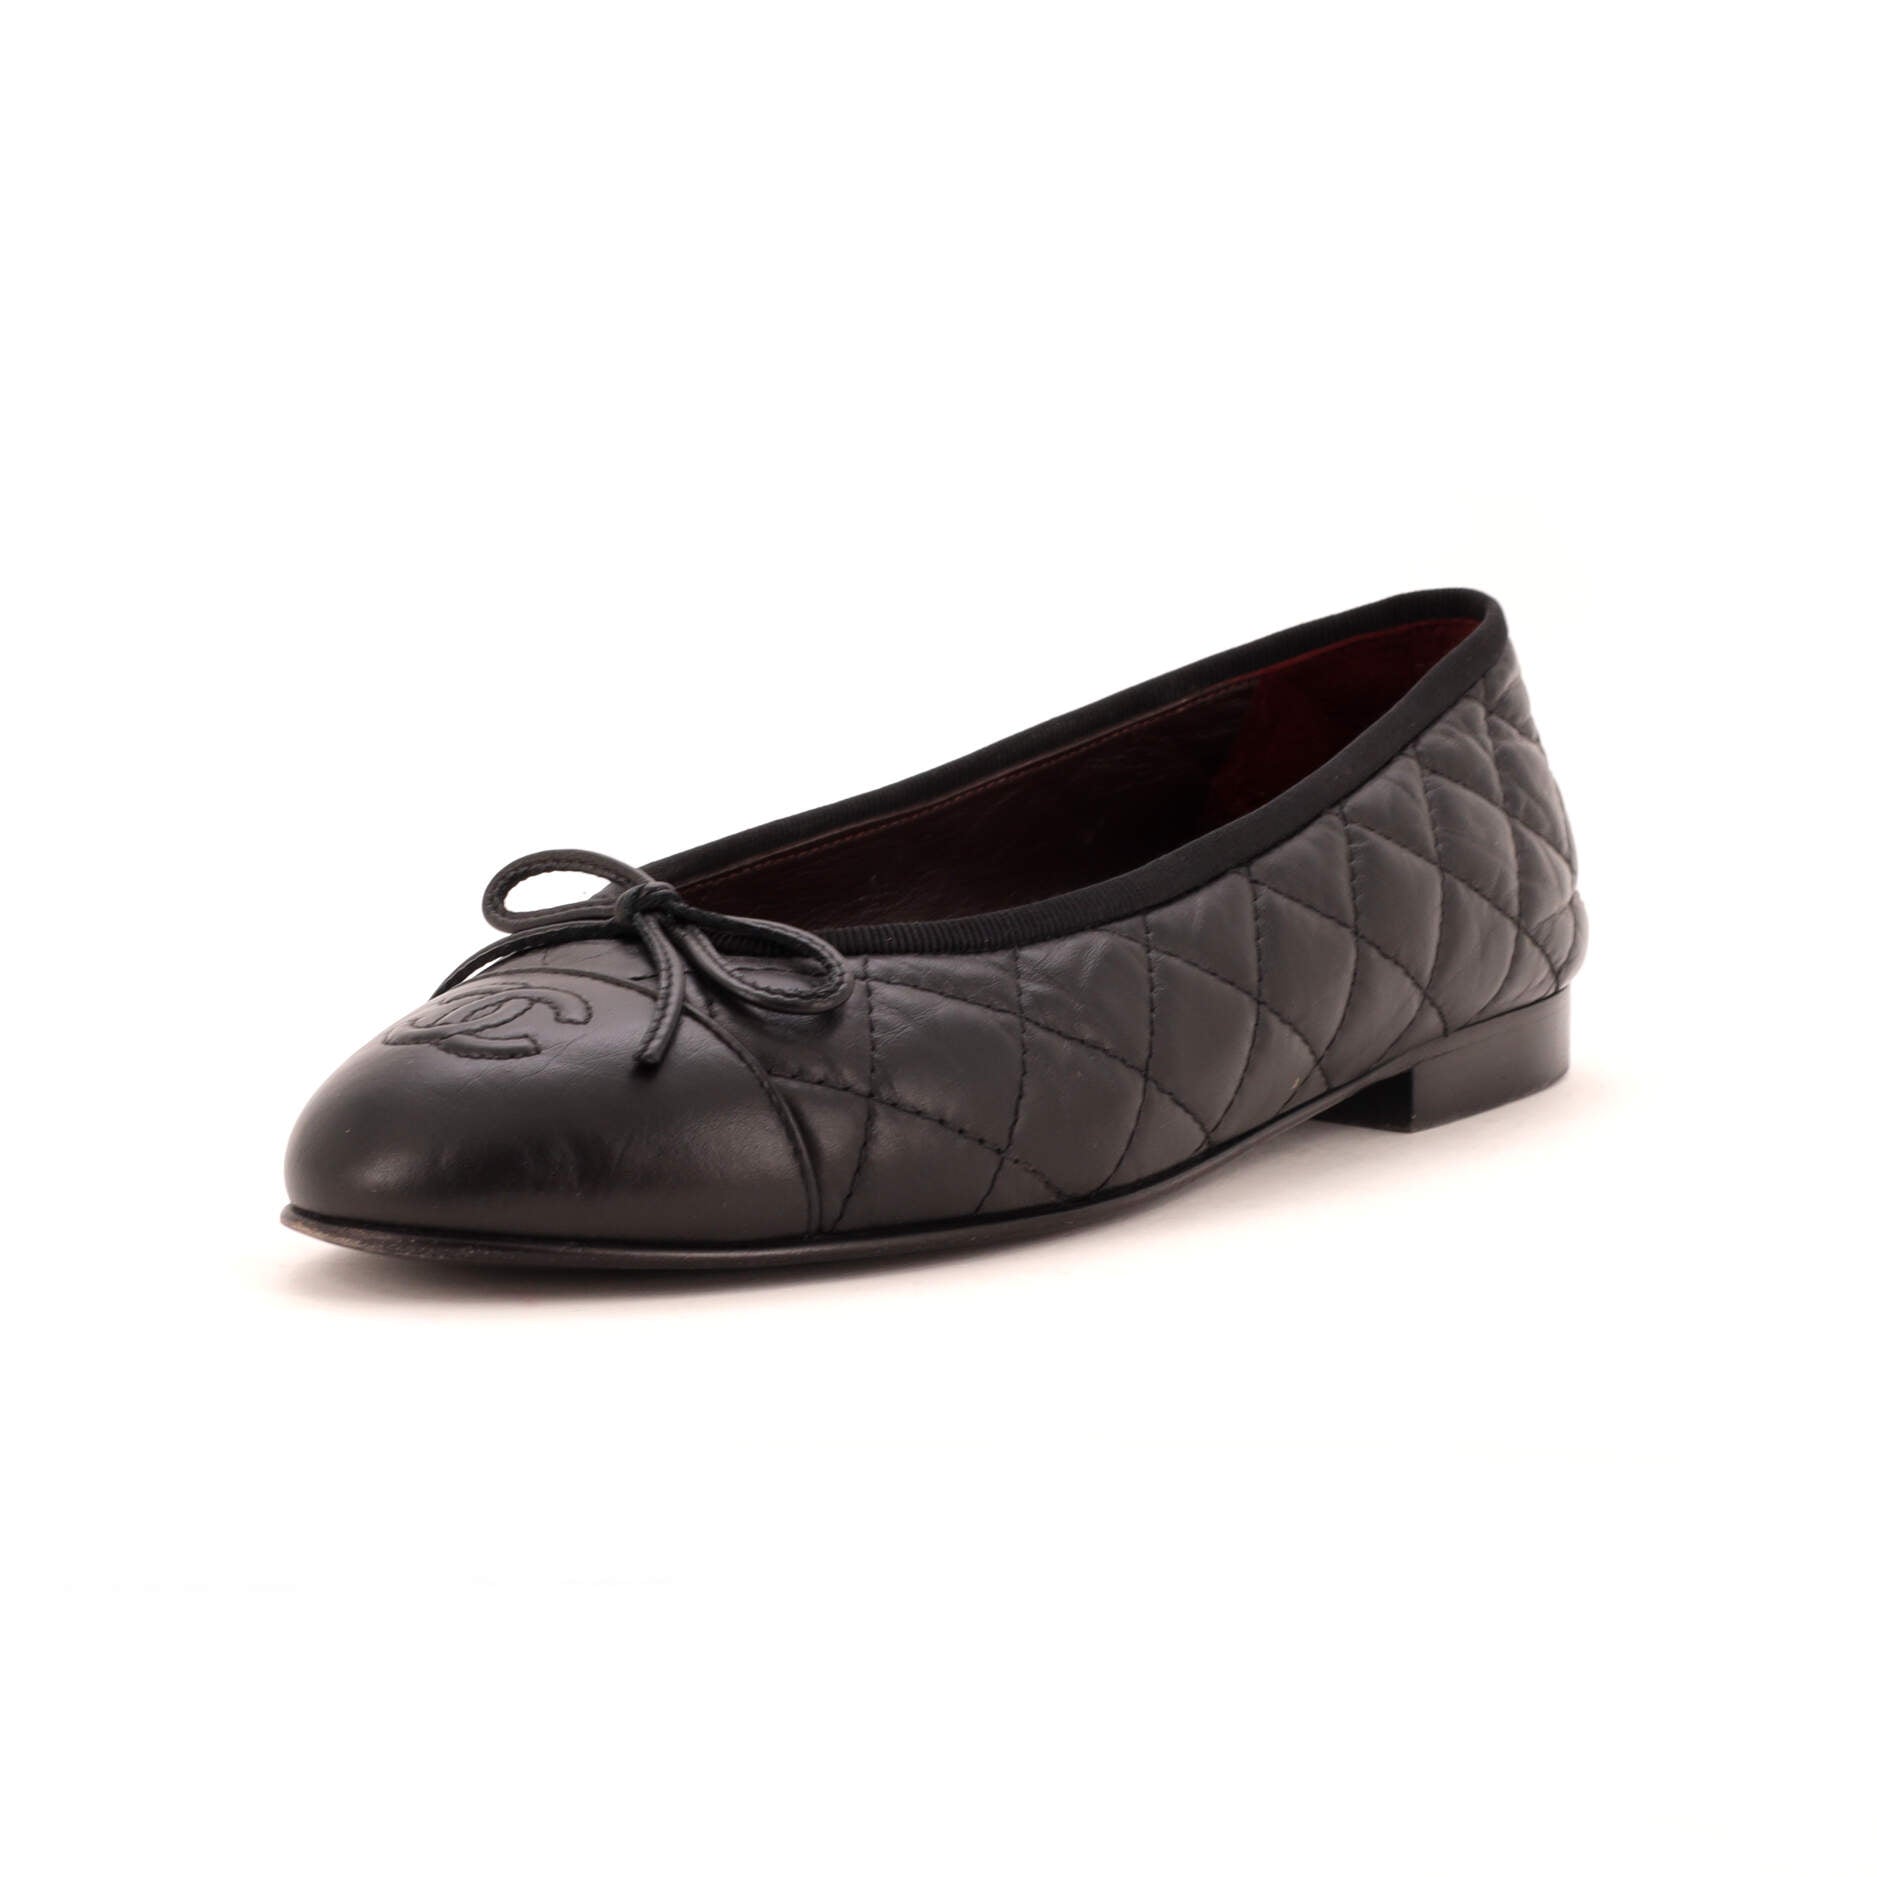 Women's CC Cap Toe Bow Ballerina Flats Quilted Leather